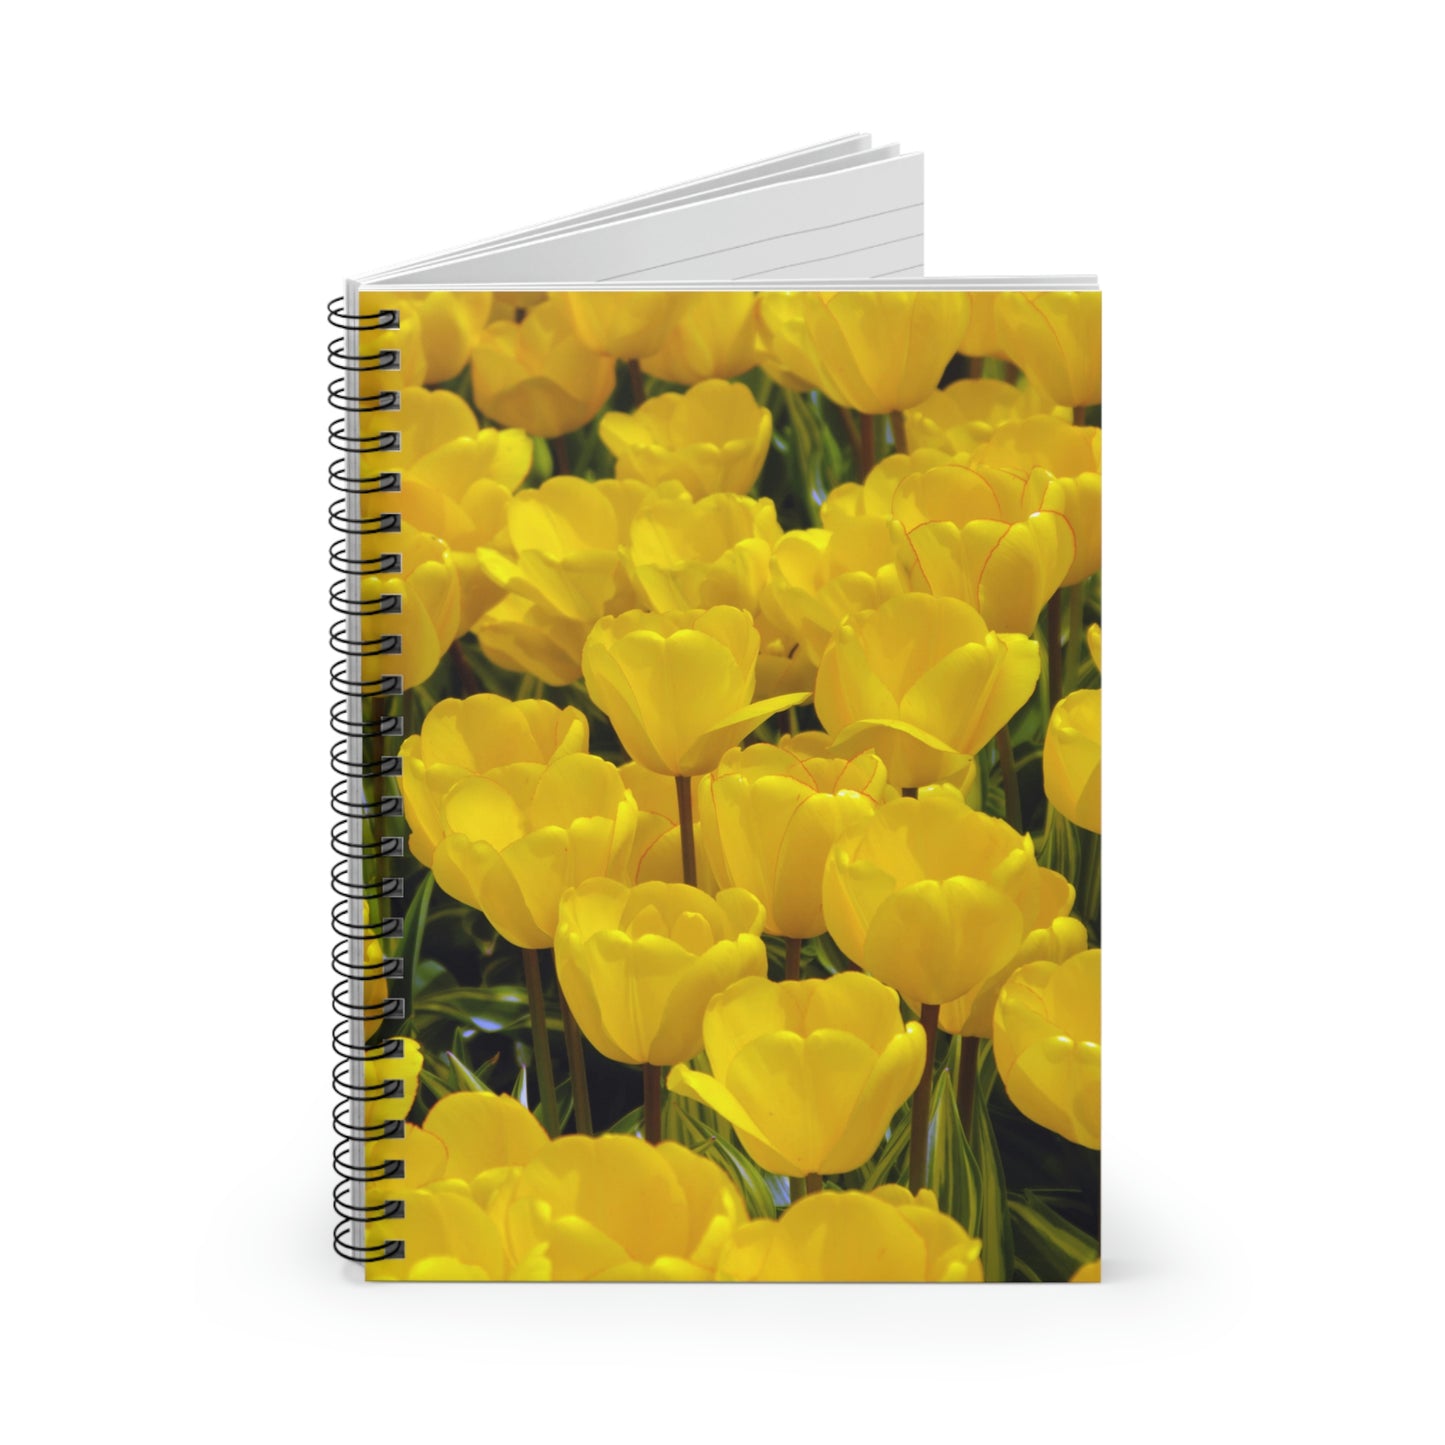 Flowers 23 Spiral Notebook - Ruled Line